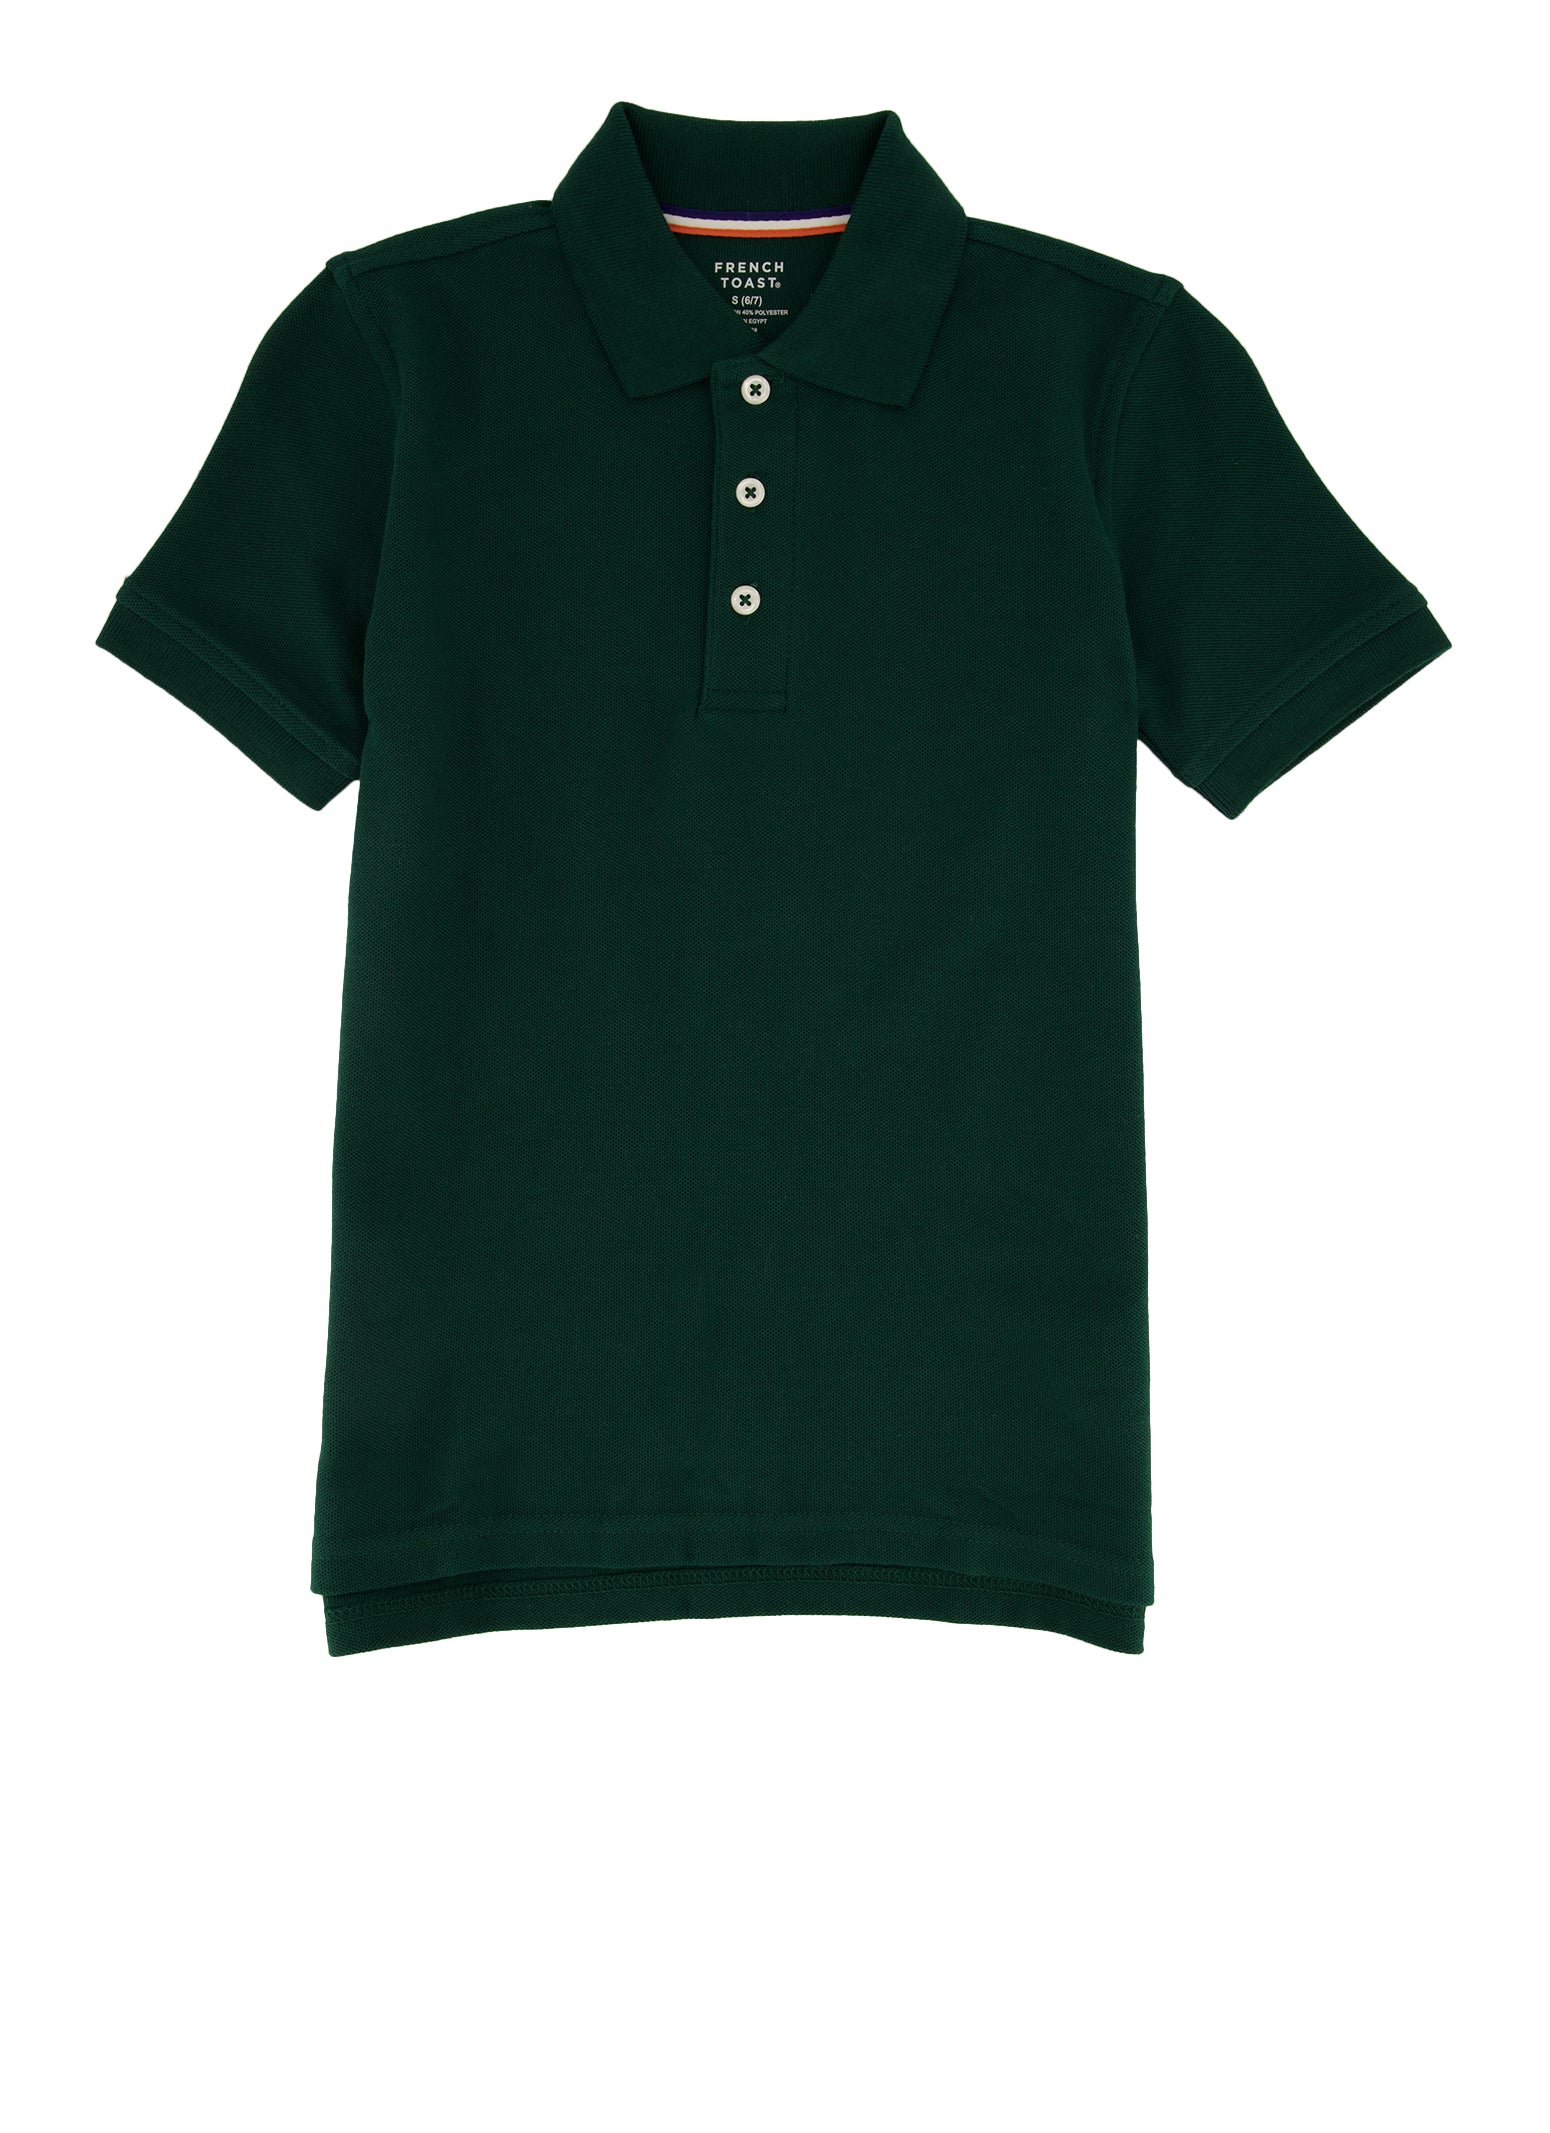 French Toast Boys 4-7 Solid Polo Shirt, Green, Size 6-7